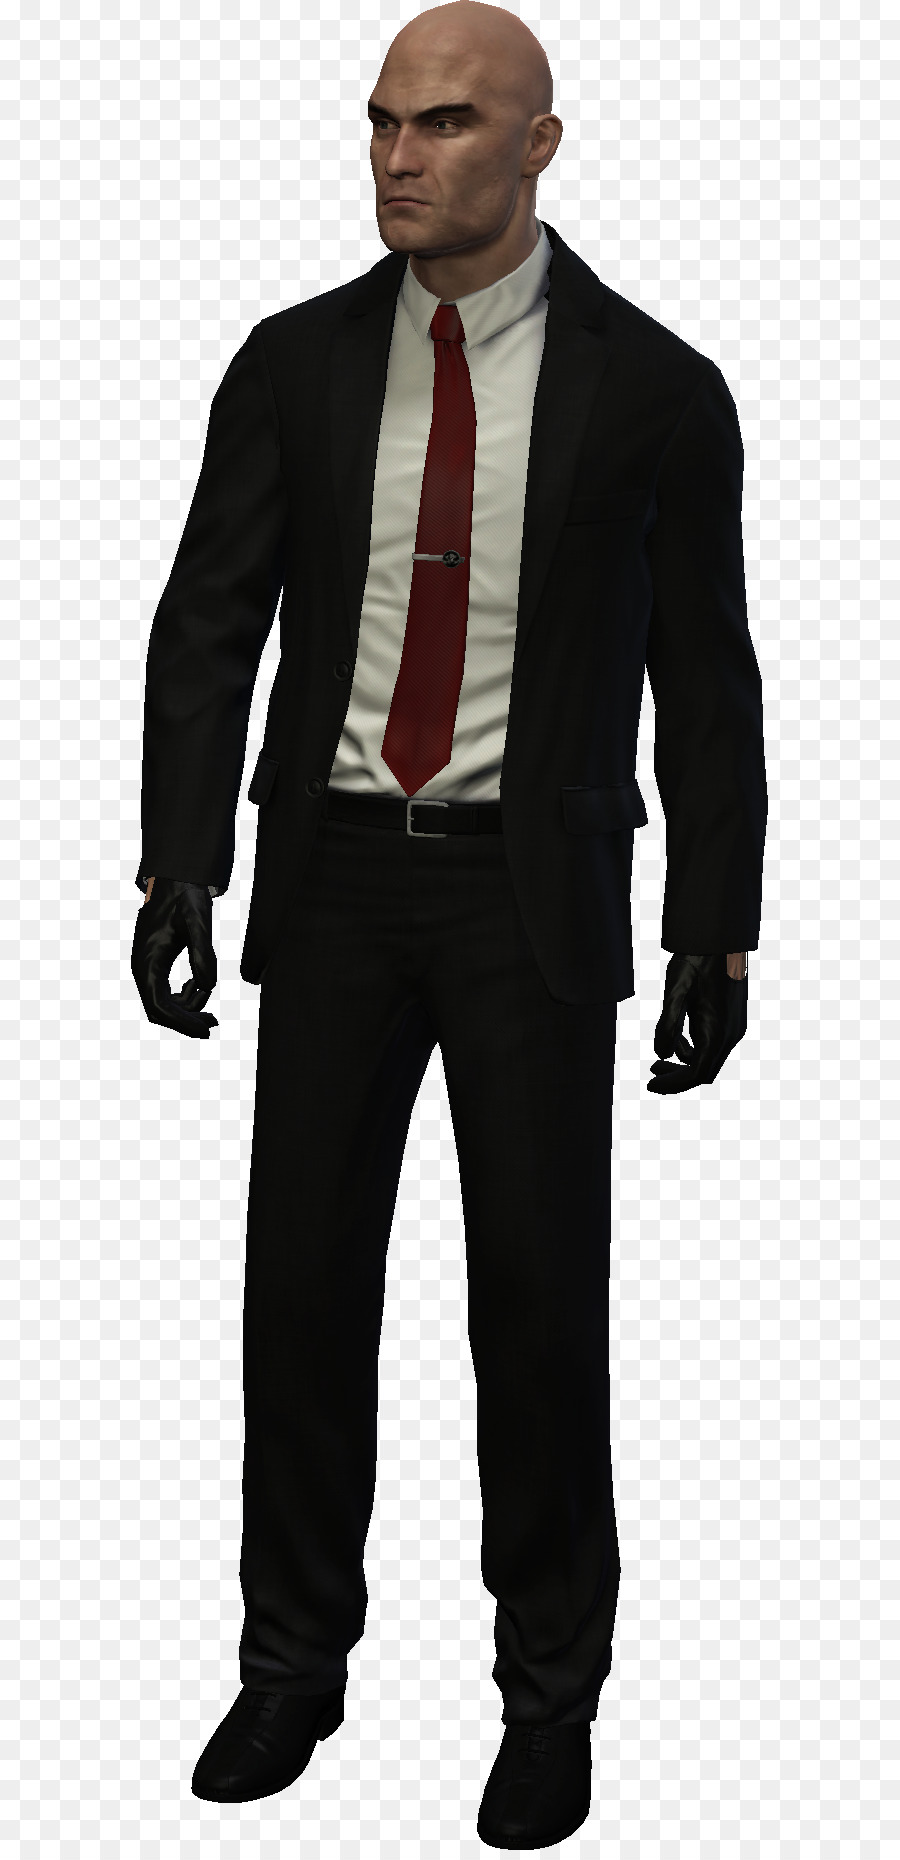 Hitman: Absolution Timothy Olyphant Agent 47 - Hitman PNG Image png download - 637*1850 - Free Transparent Hitman Absolution png Download.